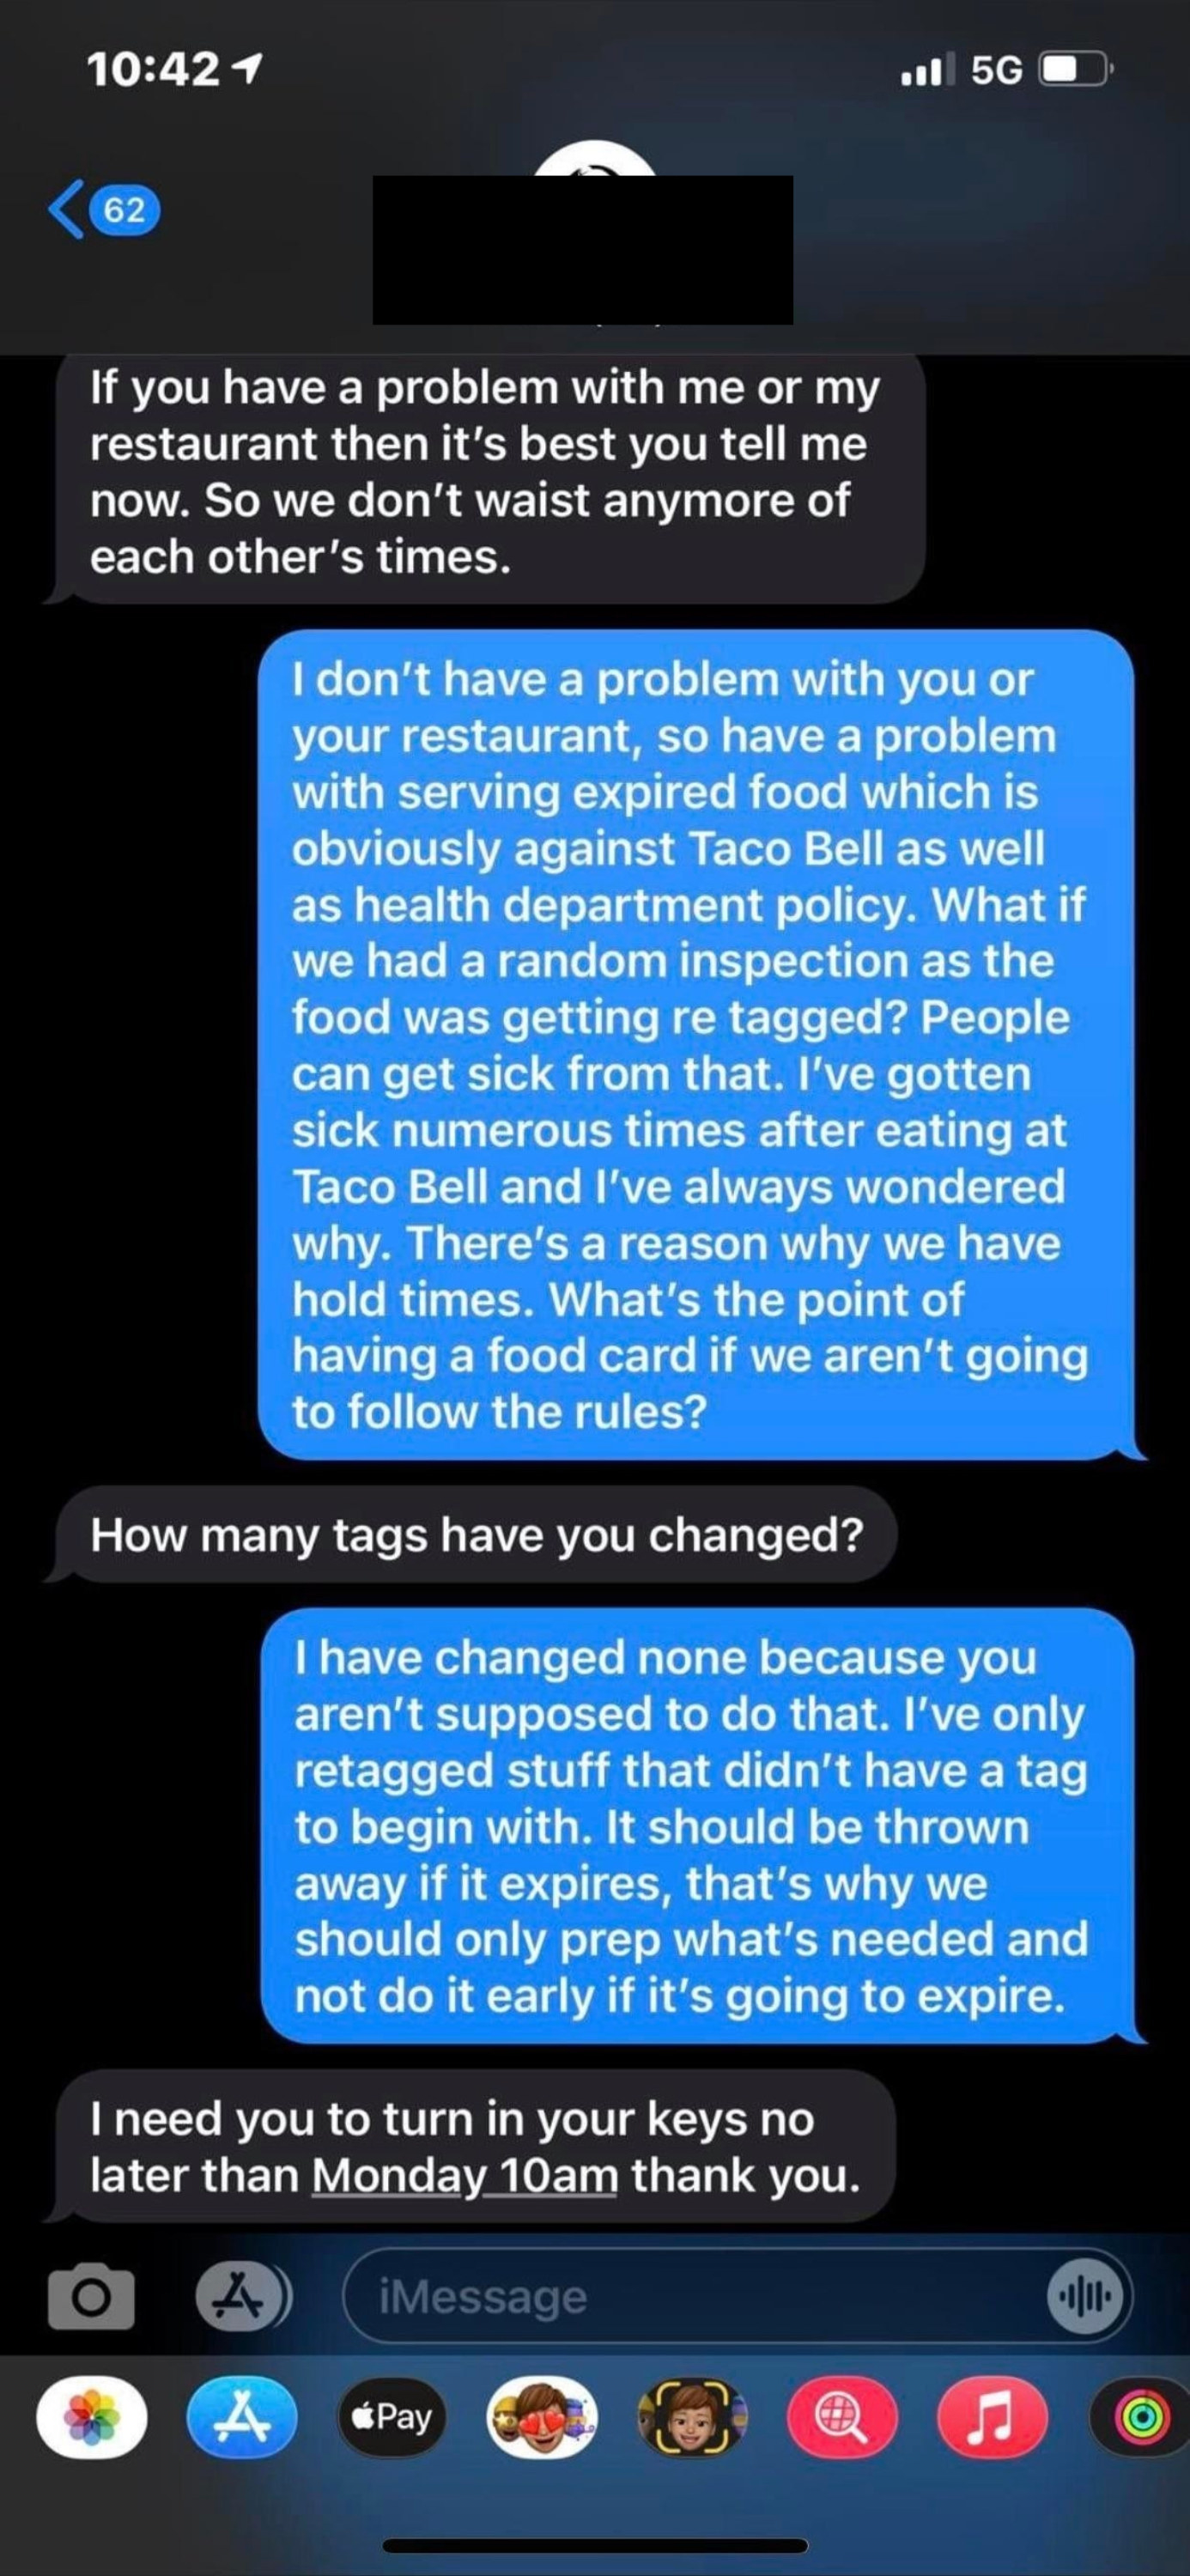 A boss firing an employee after they brought up an issue of the restaurant using expired food